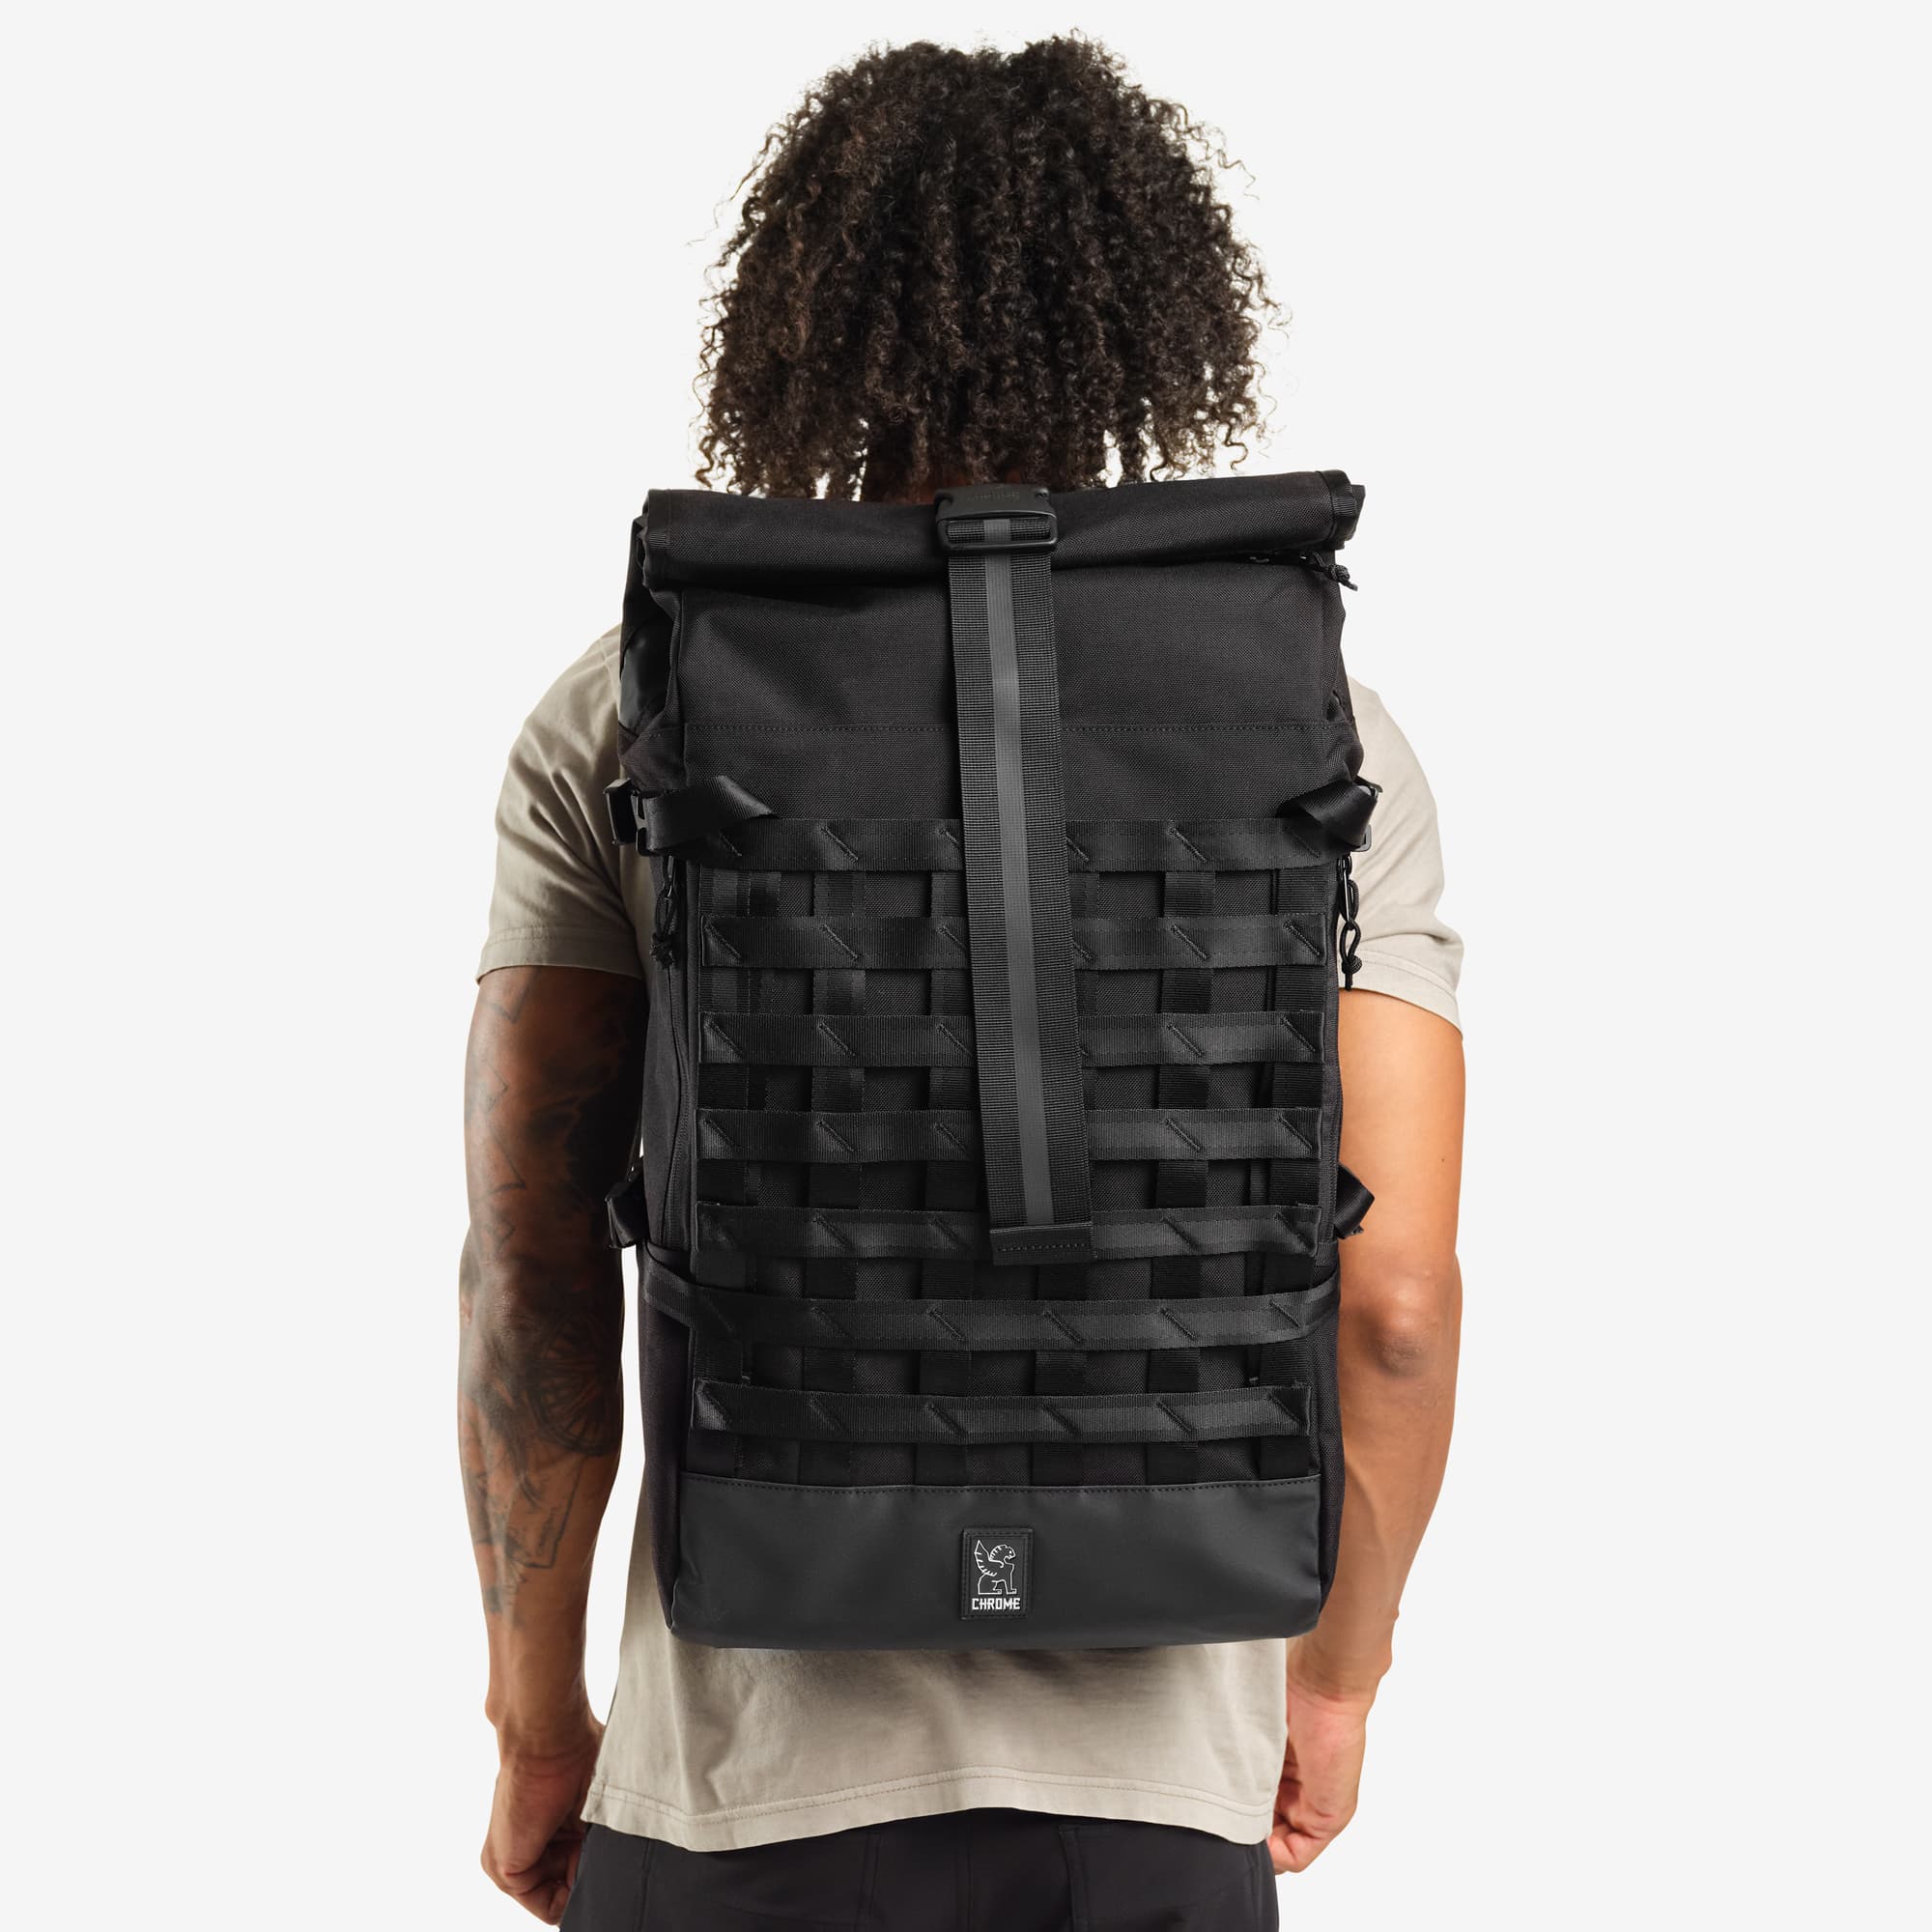 Black Barrage Freight Backpack on a person